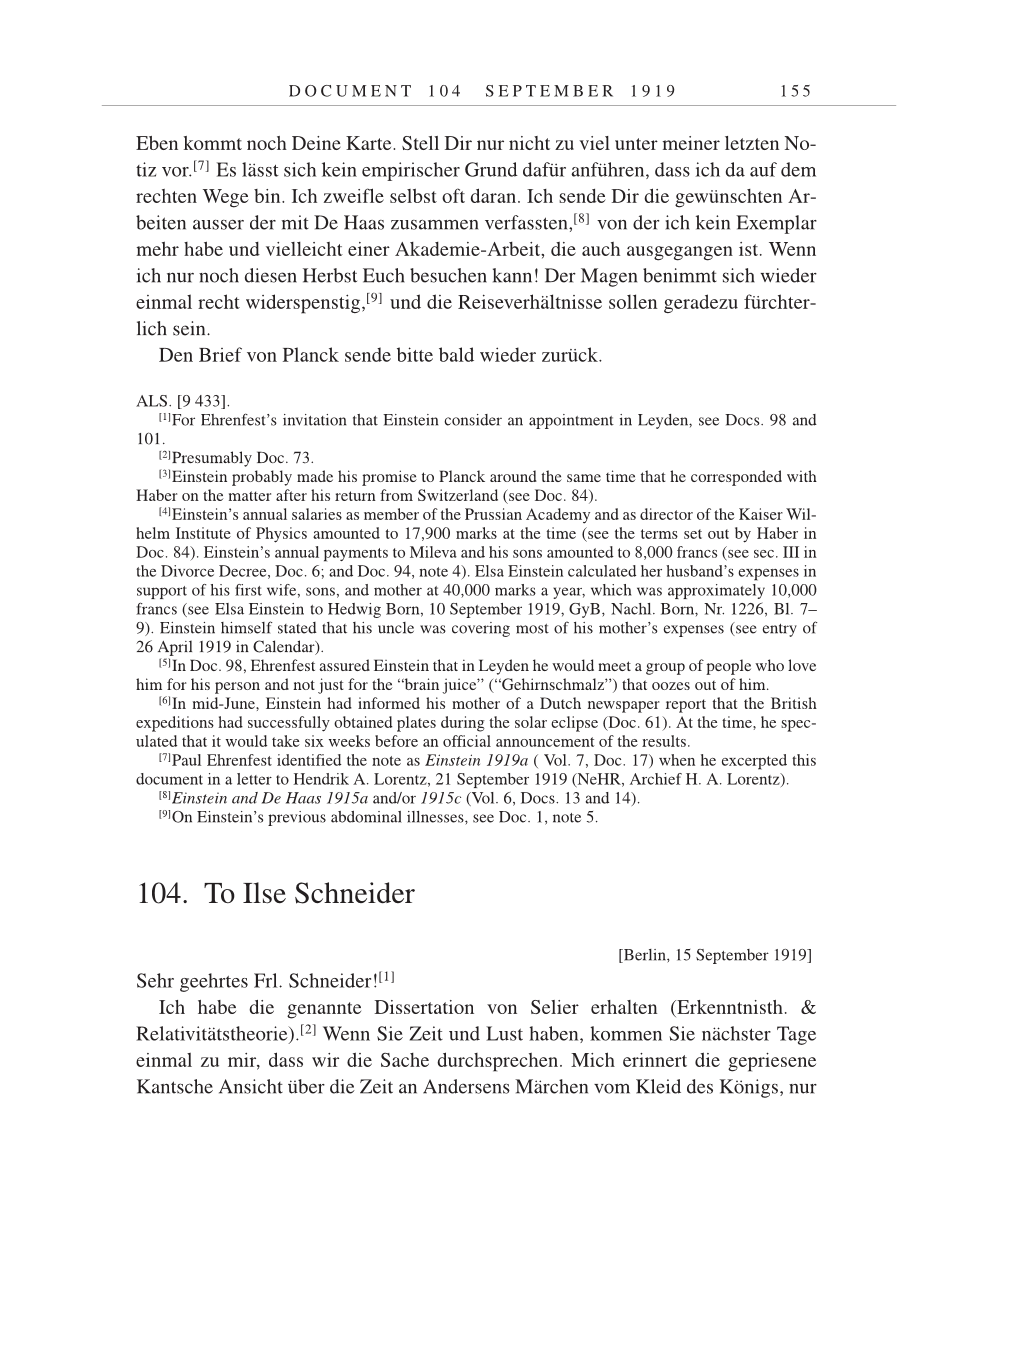 Volume 9: The Berlin Years: Correspondence January 1919-April 1920 page 155